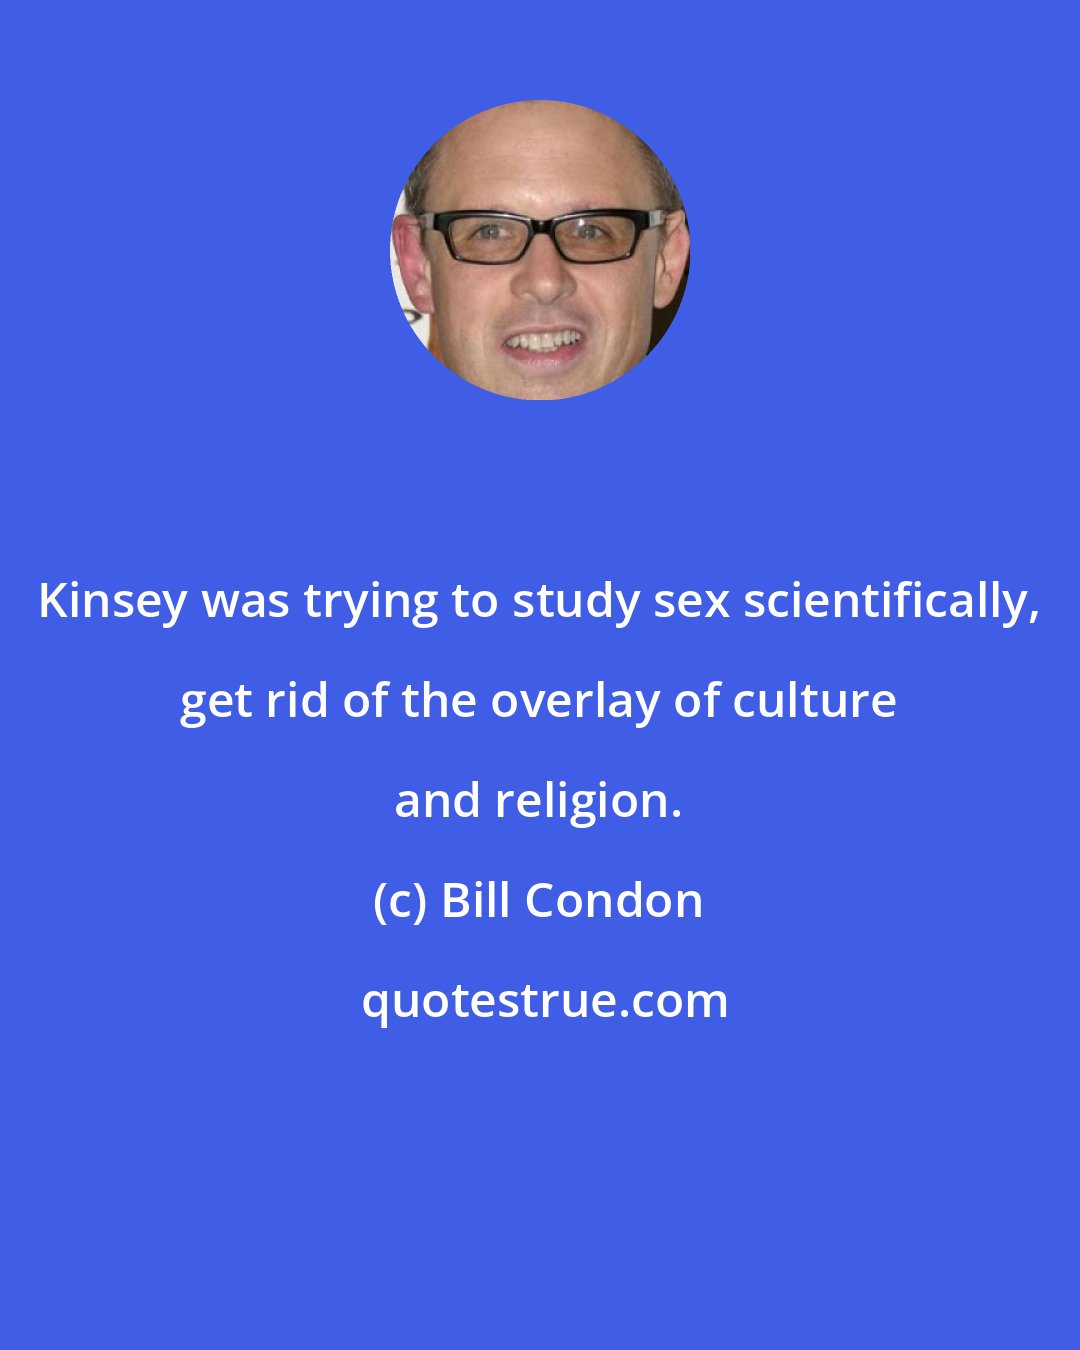 Bill Condon: Kinsey was trying to study sex scientifically, get rid of the overlay of culture and religion.